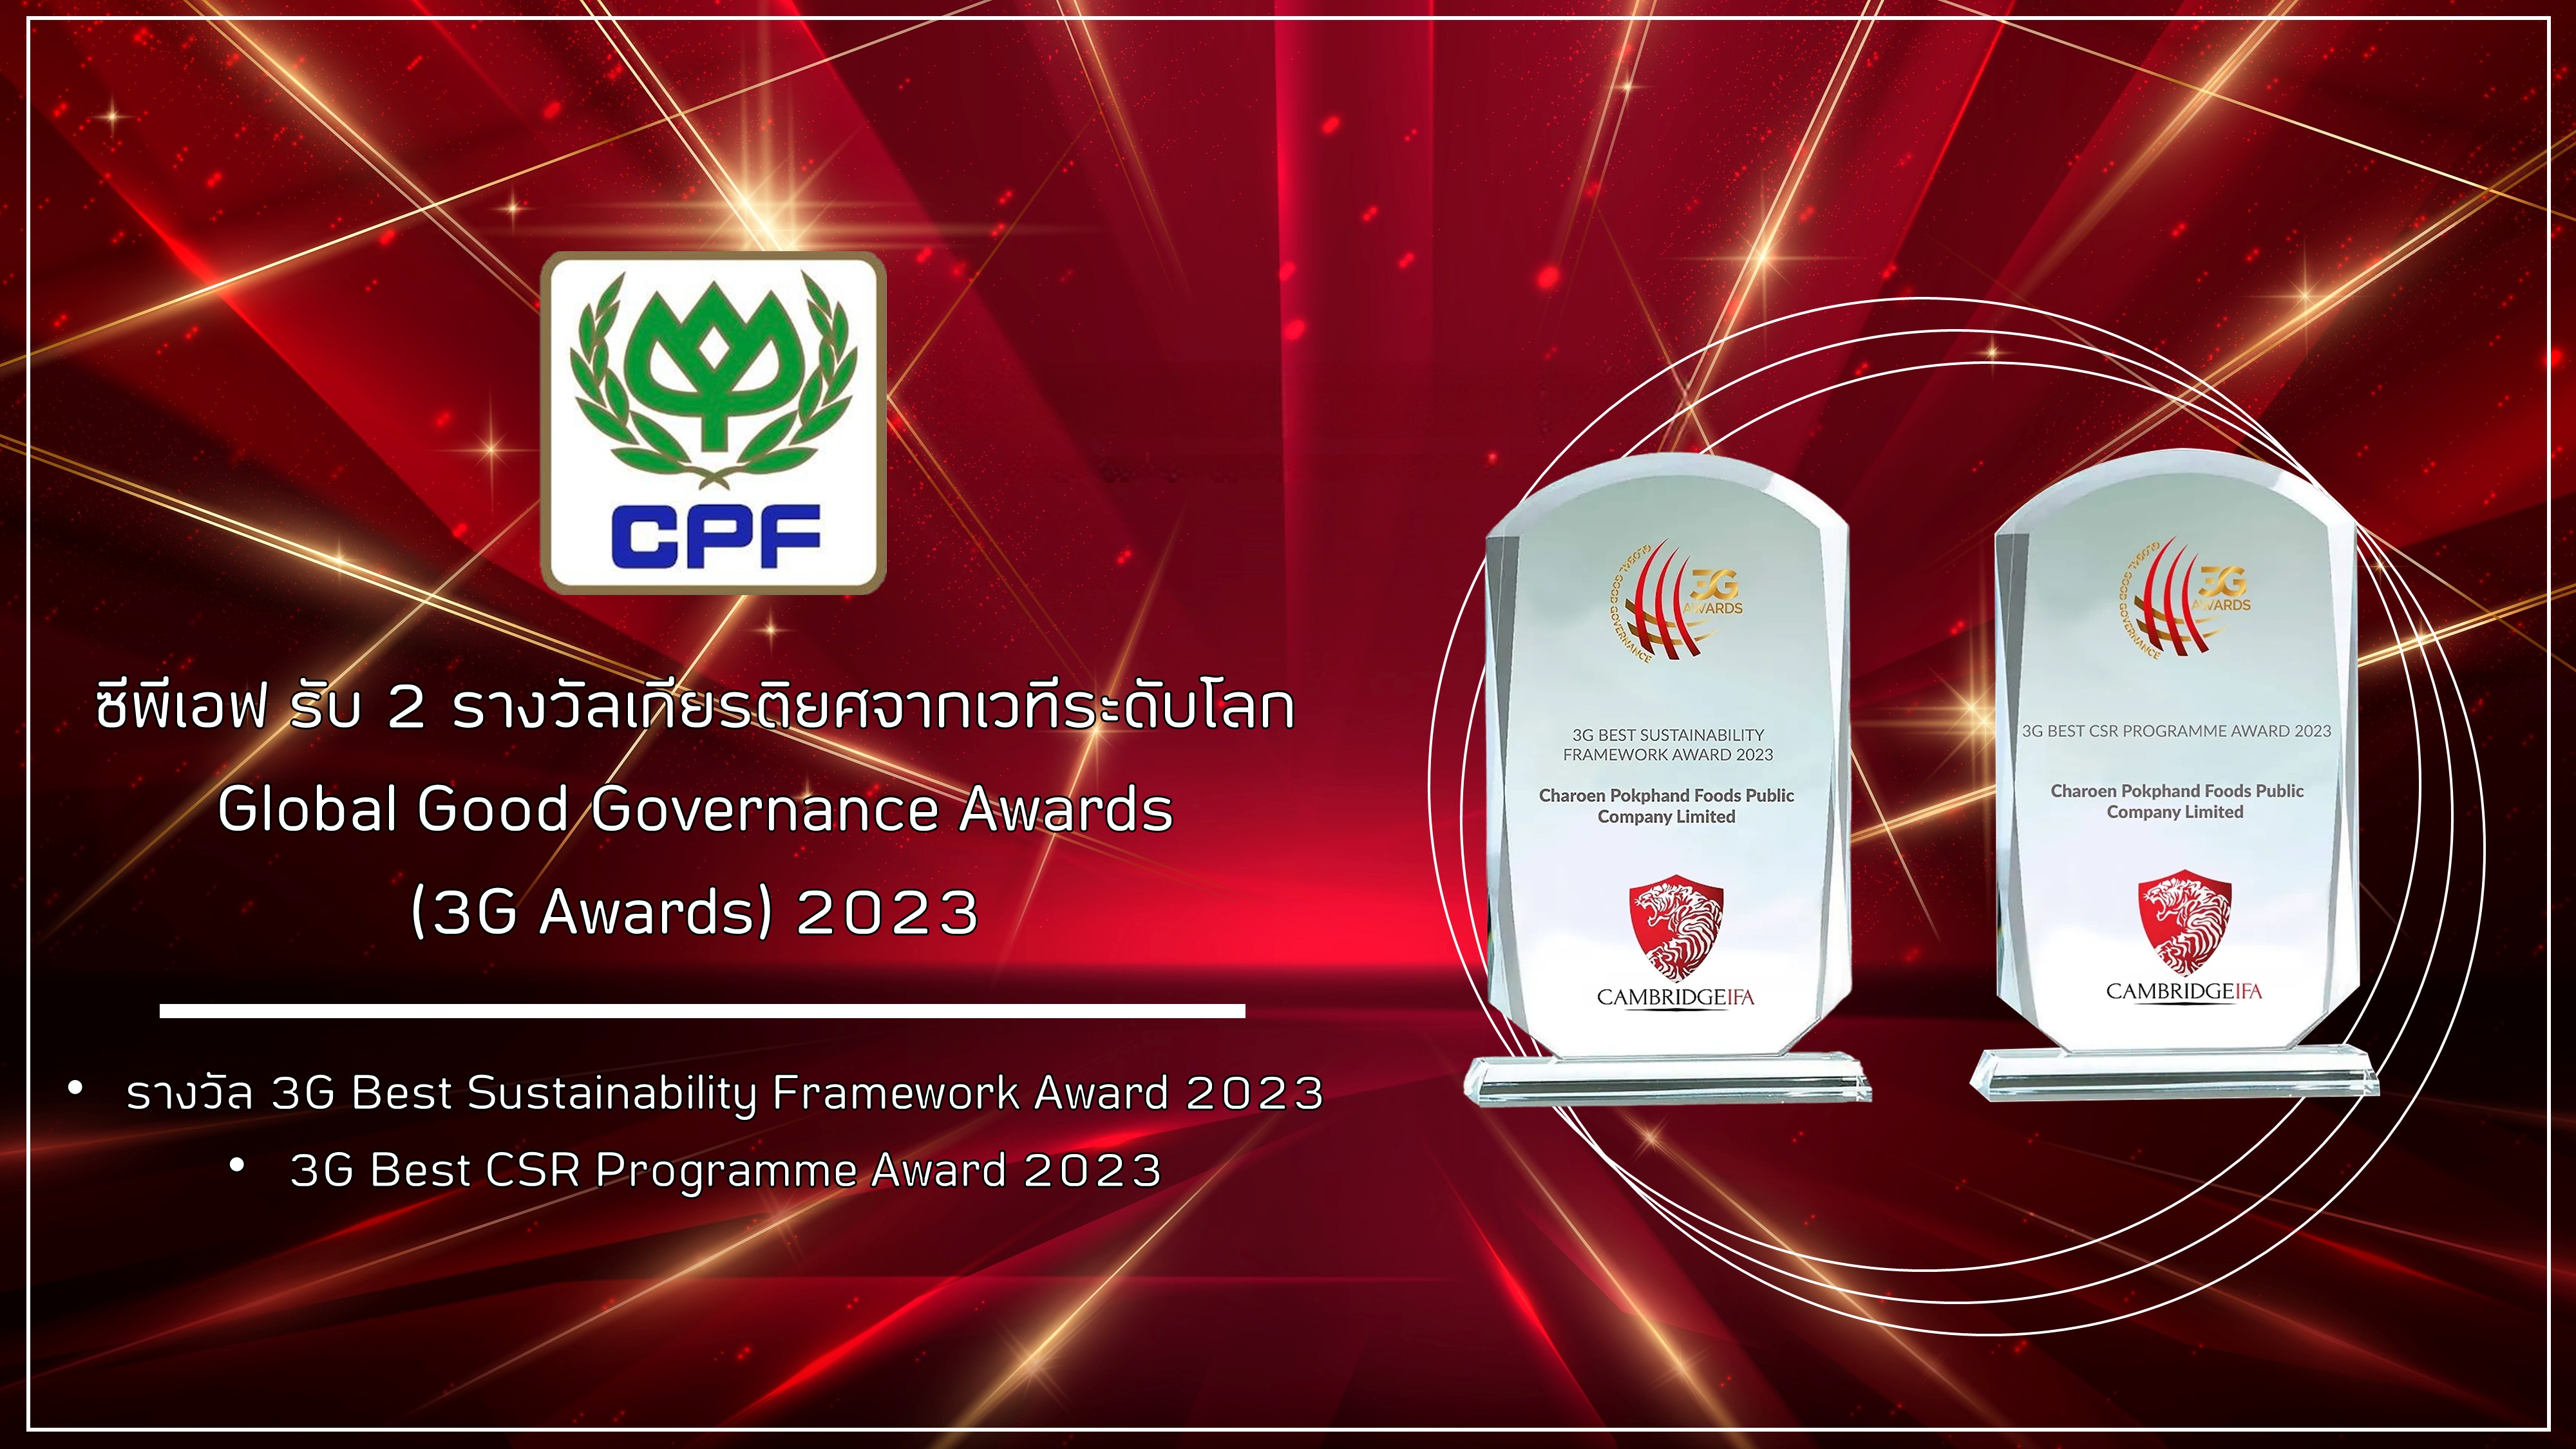 CP Foods wins 3G Awards 2023 for excellence in sustainability development and social responsibility practices.